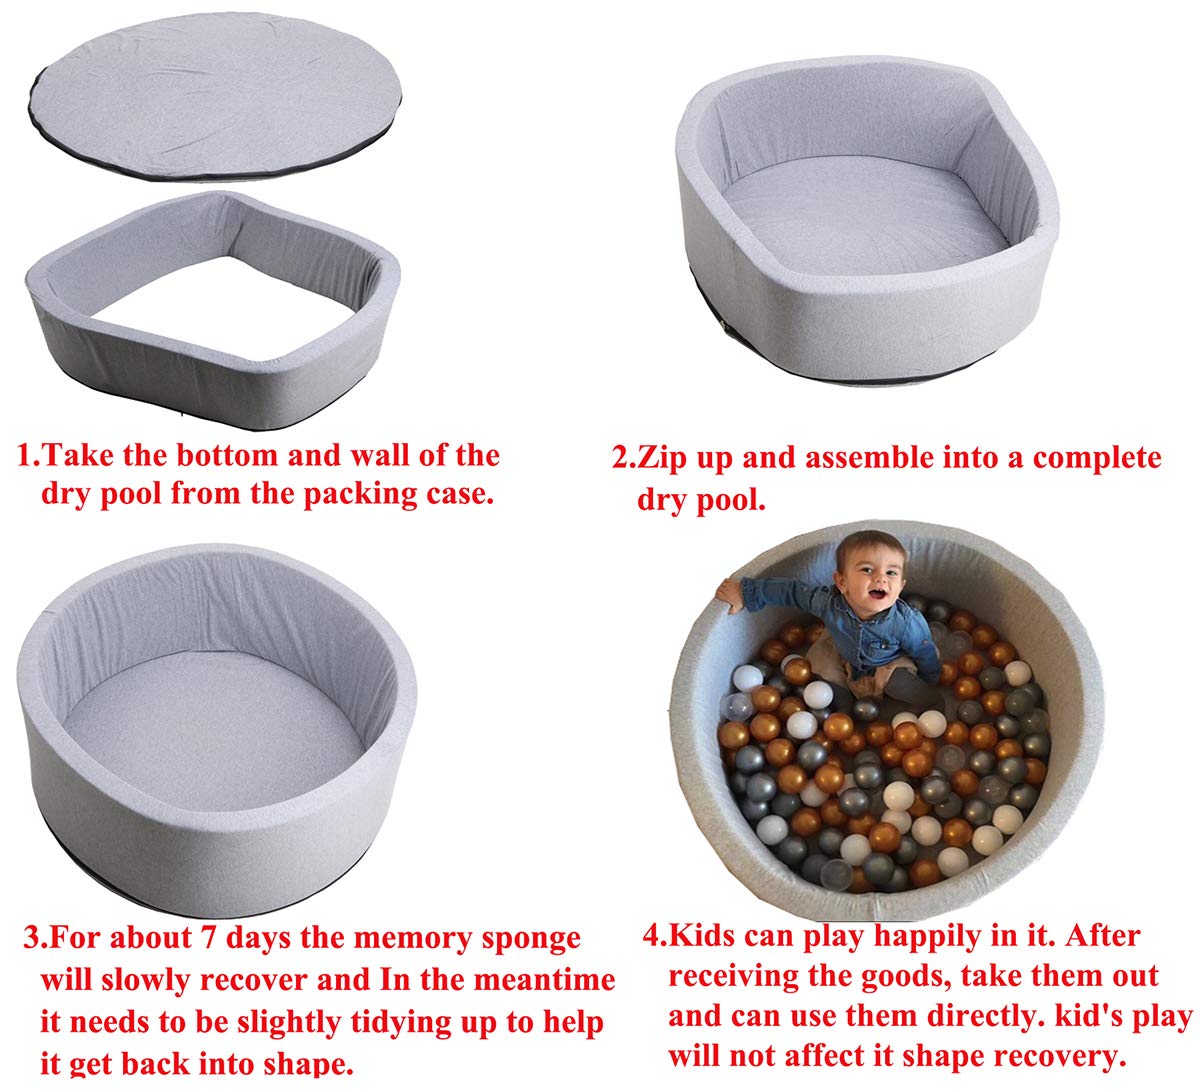 LANGXUN Pit Ball Kiddie Dry Pools, Kids Ball Pit Playpen for Baby Kids Children, Ball Pits Accessories, Baby Toddler Ball Pit, Indoor Playpen, Birthday for Baby Toddler Kids